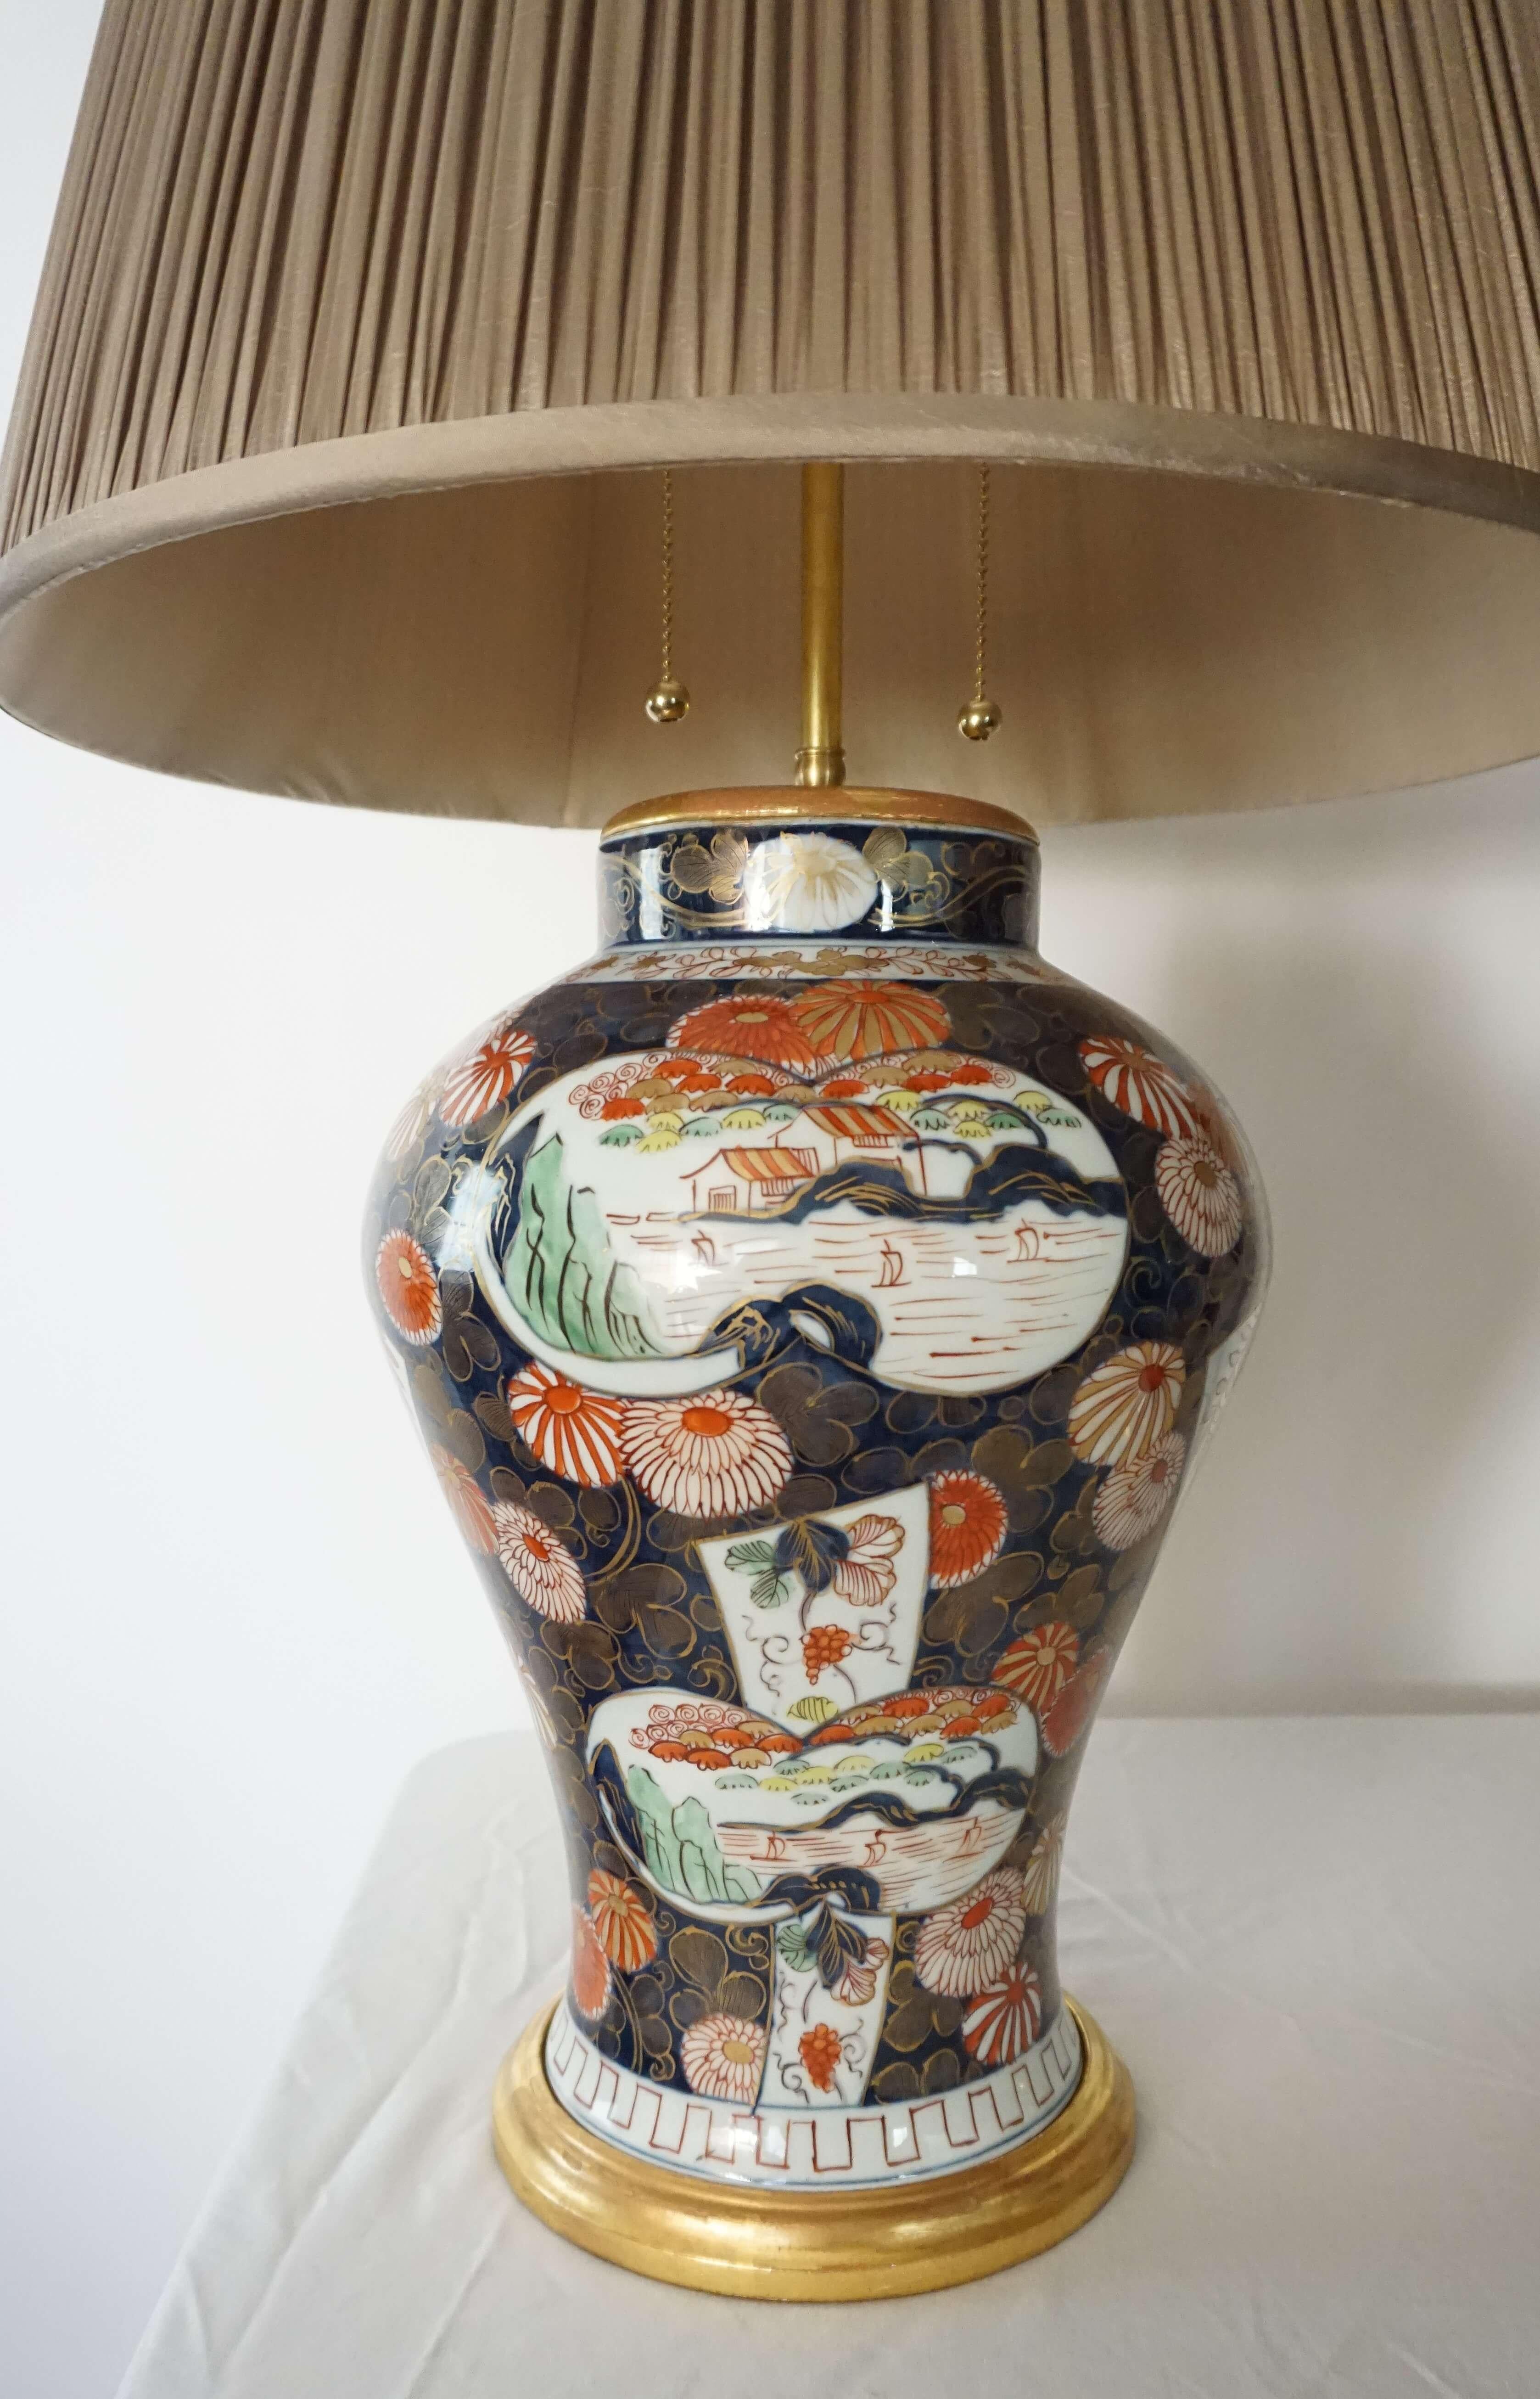 Exquisite pair of last quarter 19th century Edo Imari style baluster jar vases by Samson, Edmé et Cie, Paris mounted as table lamps with brass fittings and giltwood turned caps and bases. Size to top of vase cap is 18.5